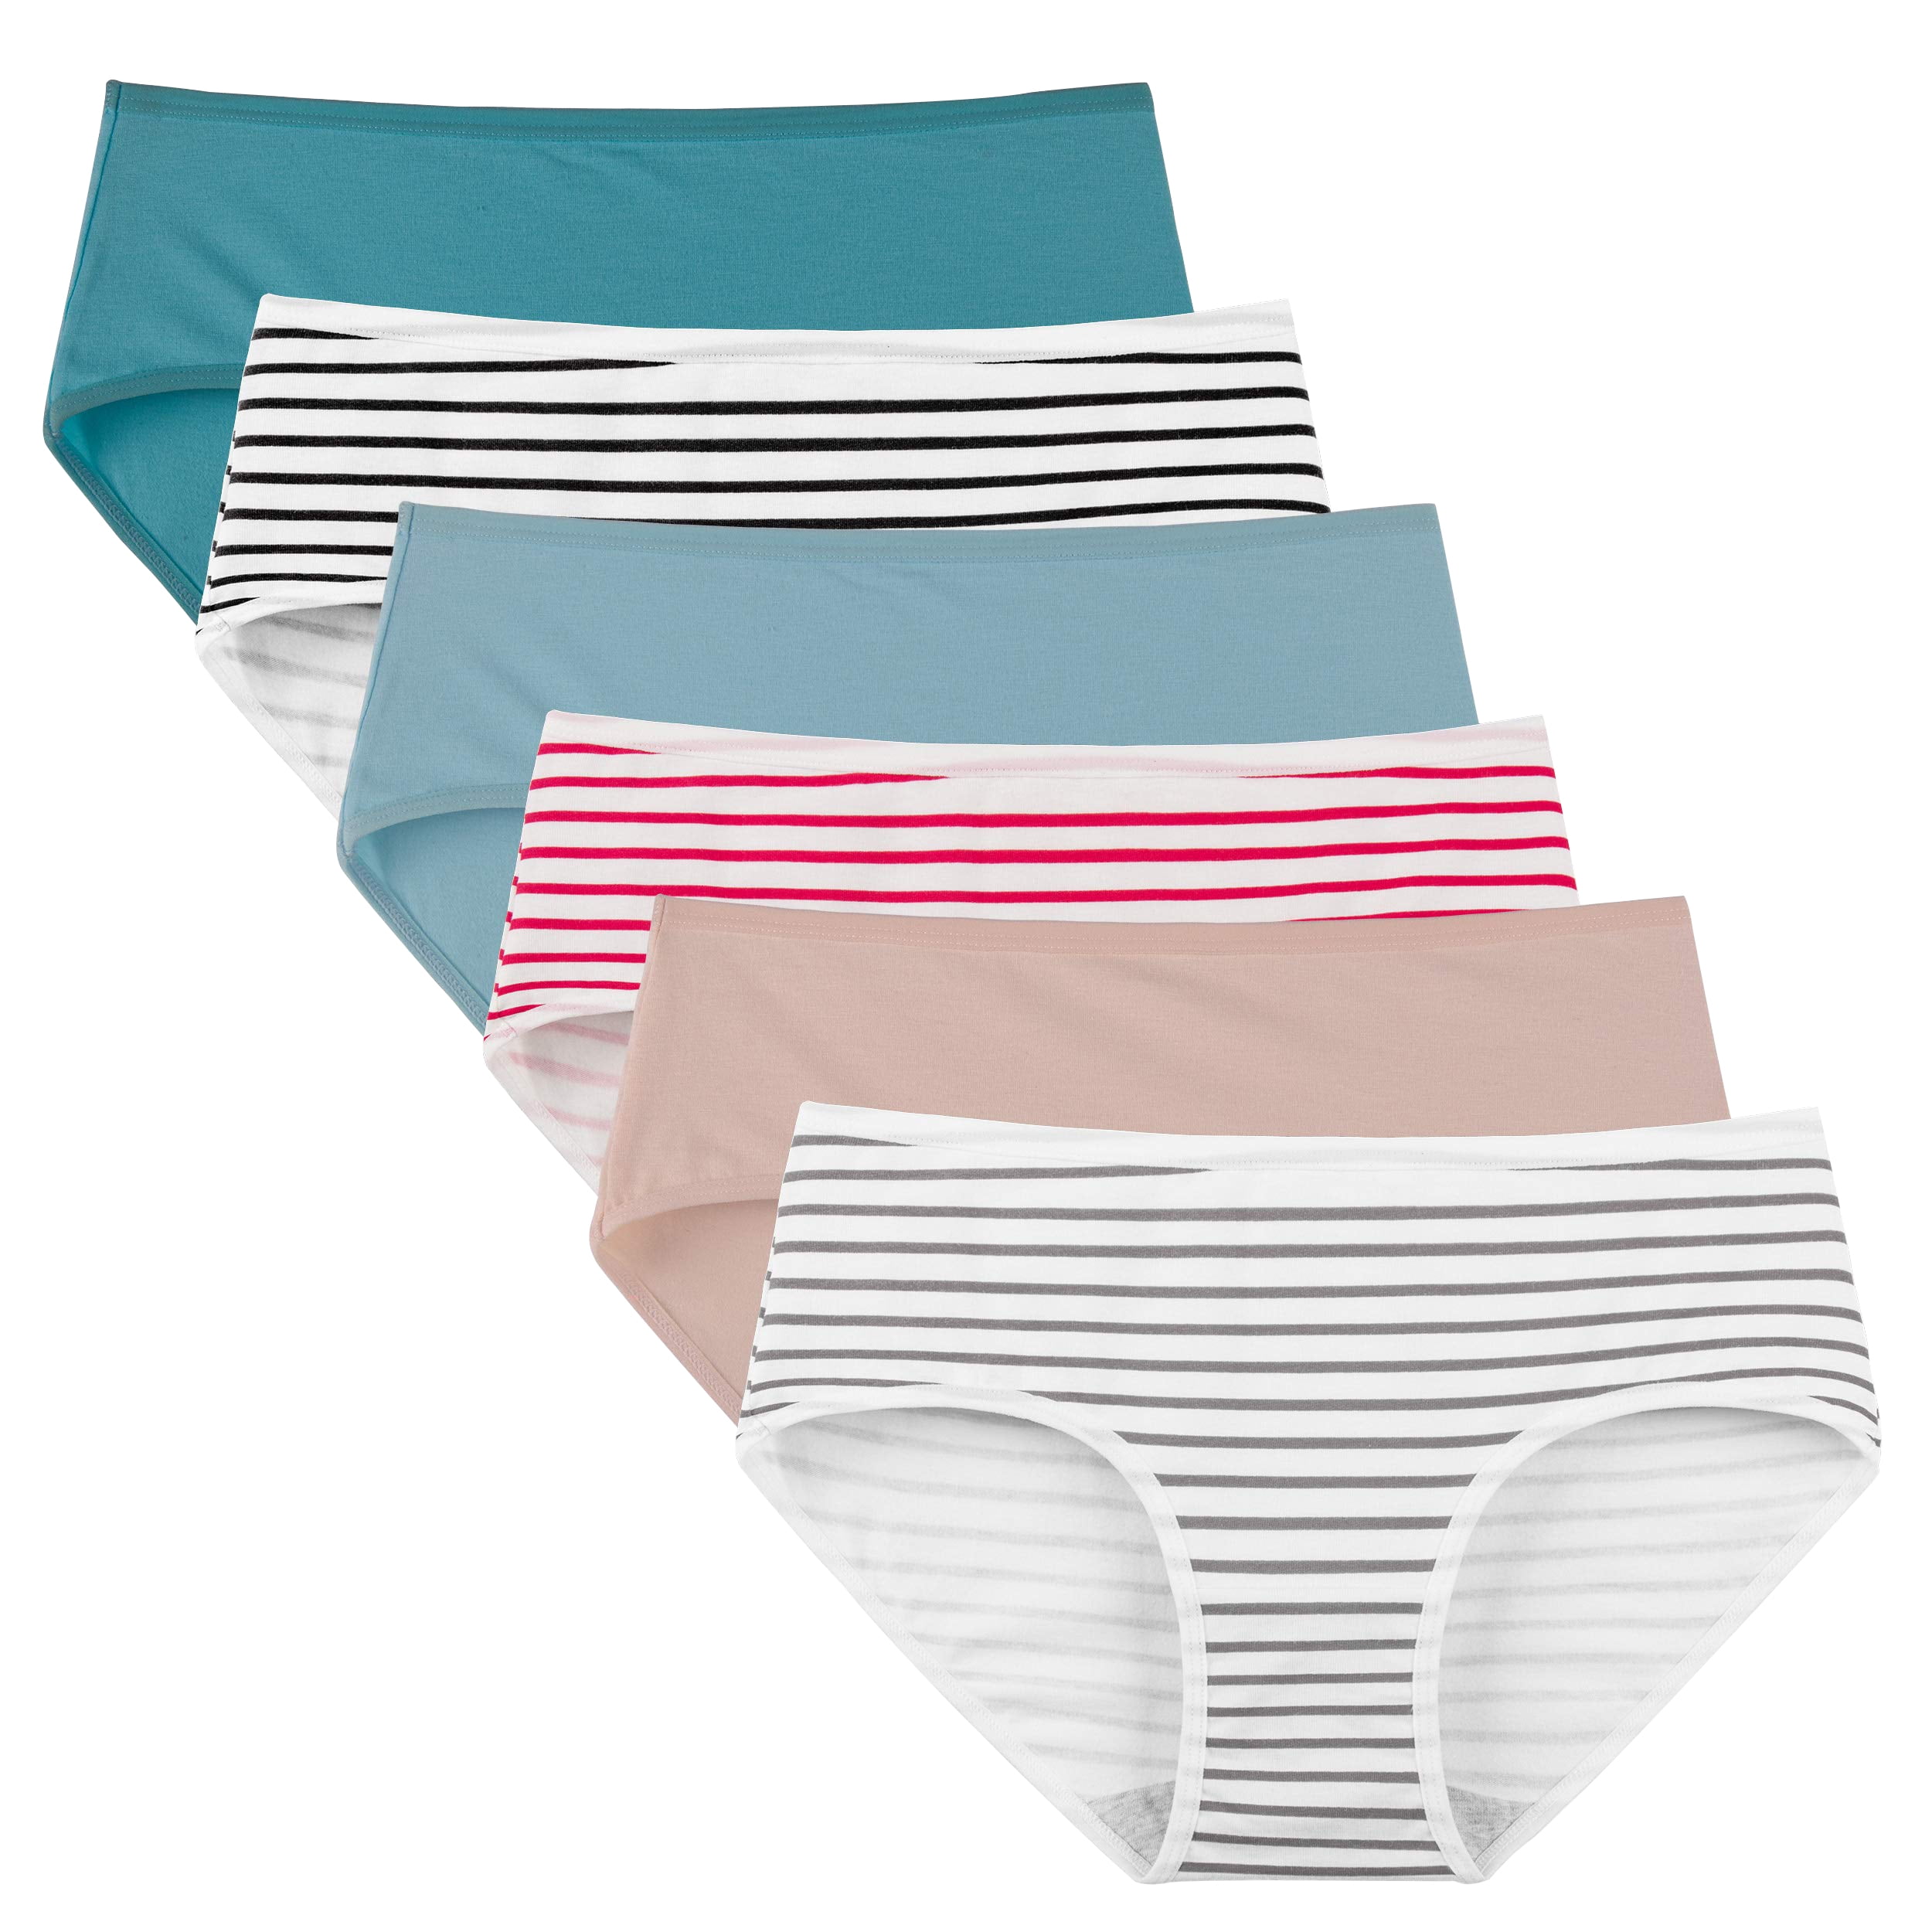 INNERSY Women's Underwear Cotton Panties Hipster Regular & Plus Size  Underwear Pack of 6 (XS, Solid Colors and Stripes)